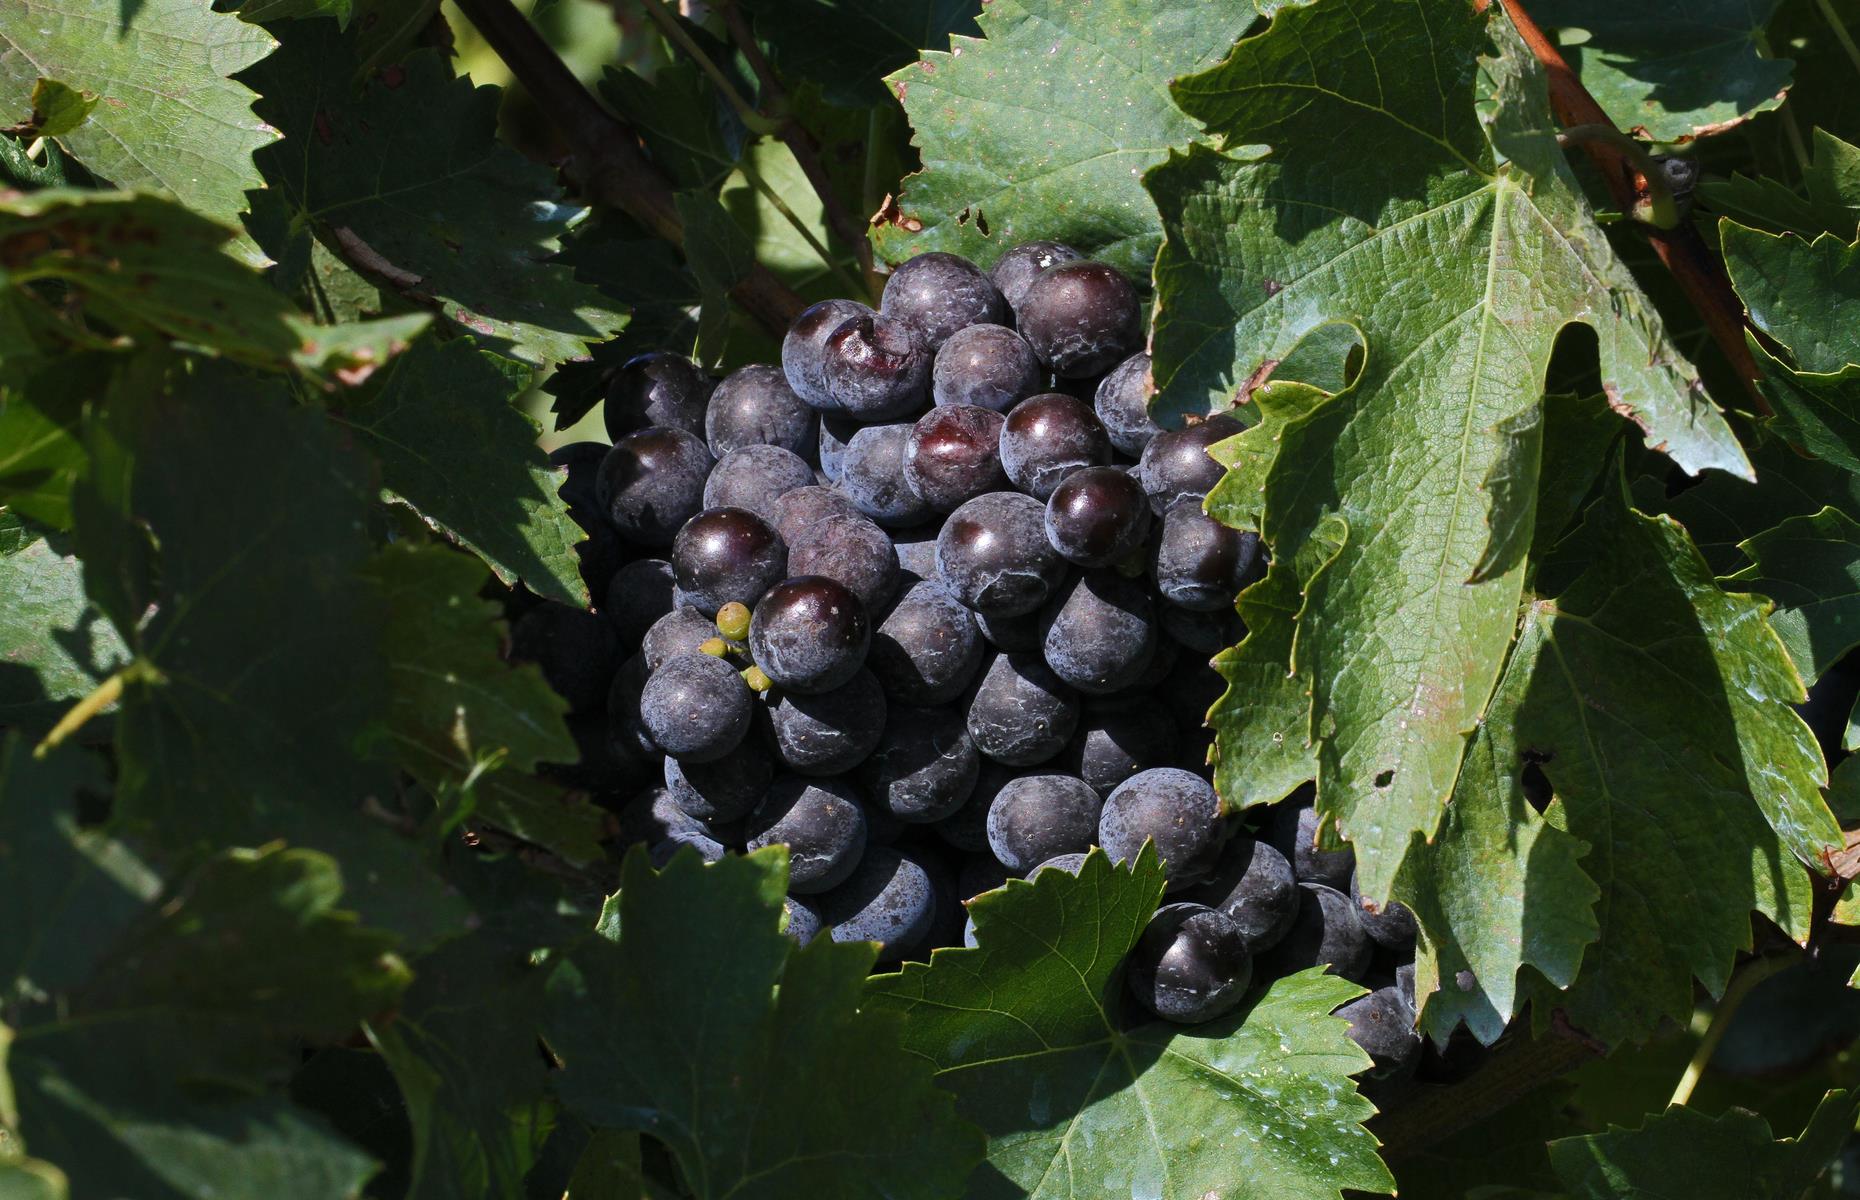 <p>Arkansas might not be the first state that springs to mind when it comes to wine, but the Natural State’s official food is a nod to its well-established viticulture scene, which is the oldest in southern USA. It got its <a href="https://www.ereferencedesk.com/resources/state-fruit/arkansas-grape.html">very own state grape in 2009</a>. The Cynthiana, or Norton, grape is native to America and is sometimes referred to as the “forgotten grape” because it all but disappeared after vines were ripped up during Prohibition, with European varieties later gaining favor.</p>